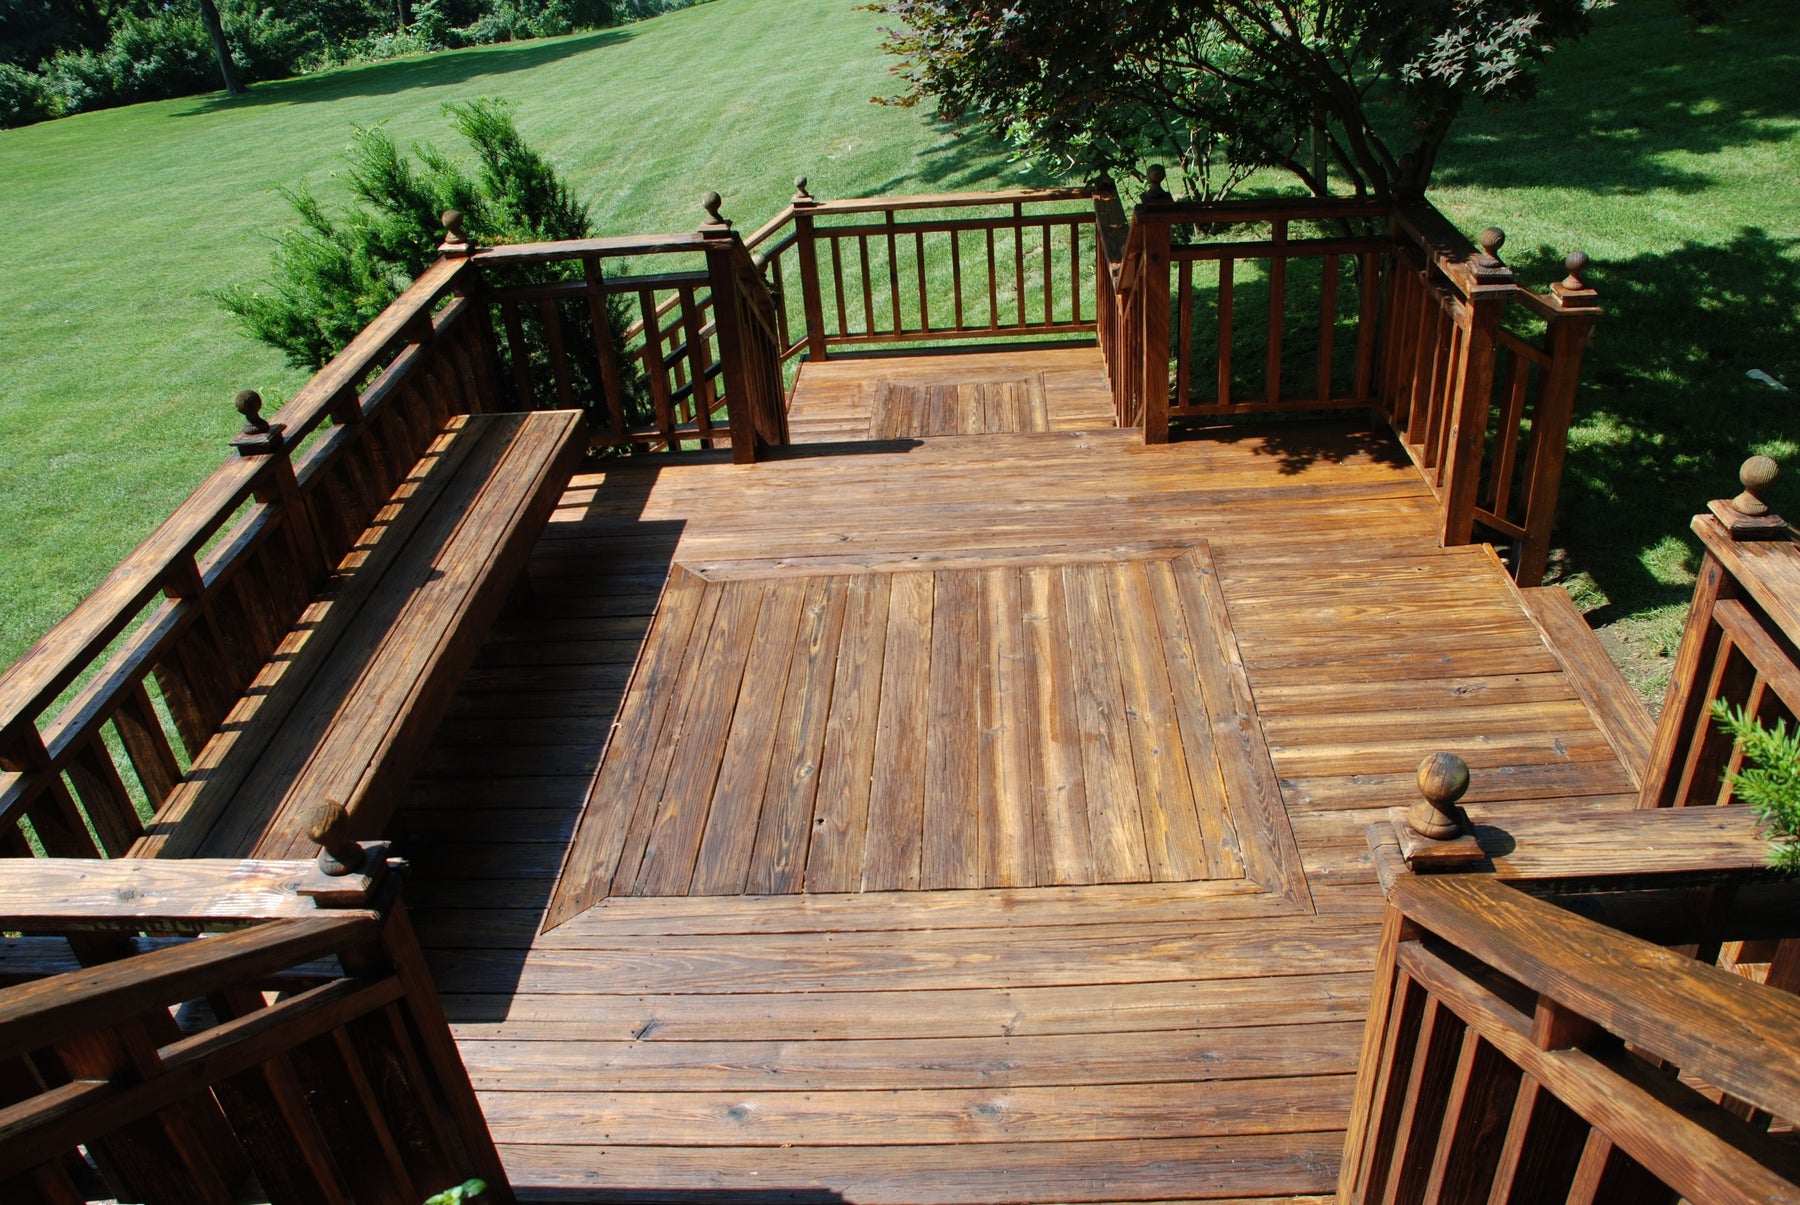 Different Ways to Decorate Your Deck